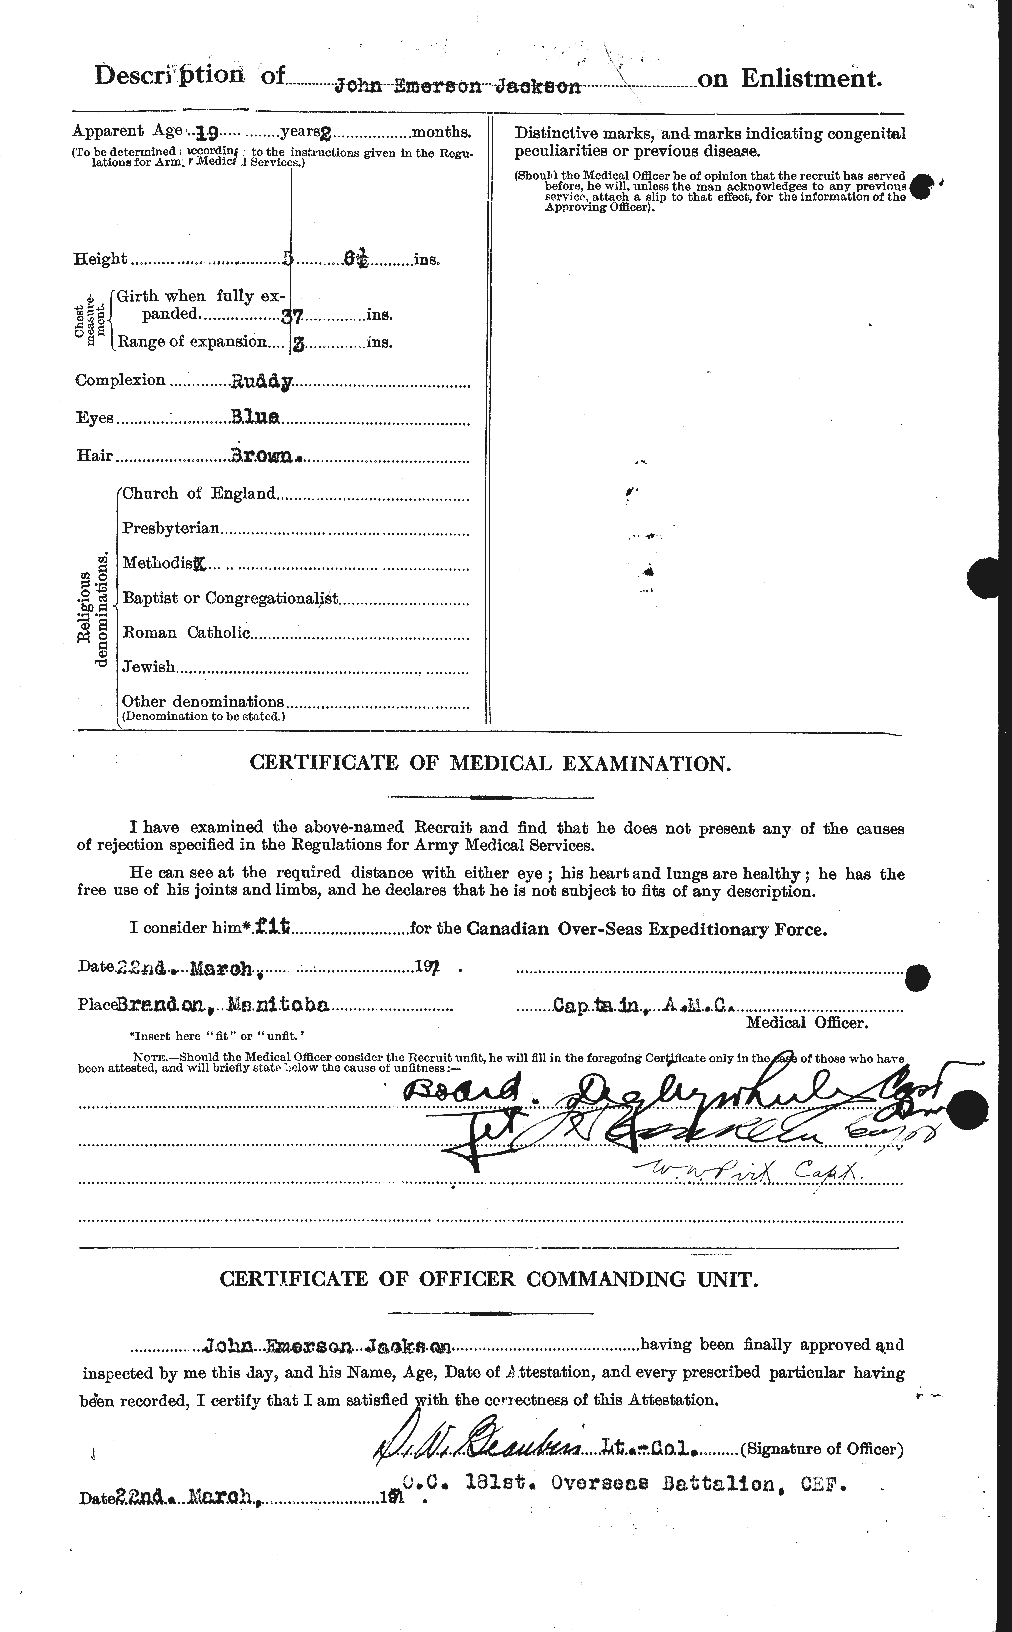 Personnel Records of the First World War - CEF 414308b